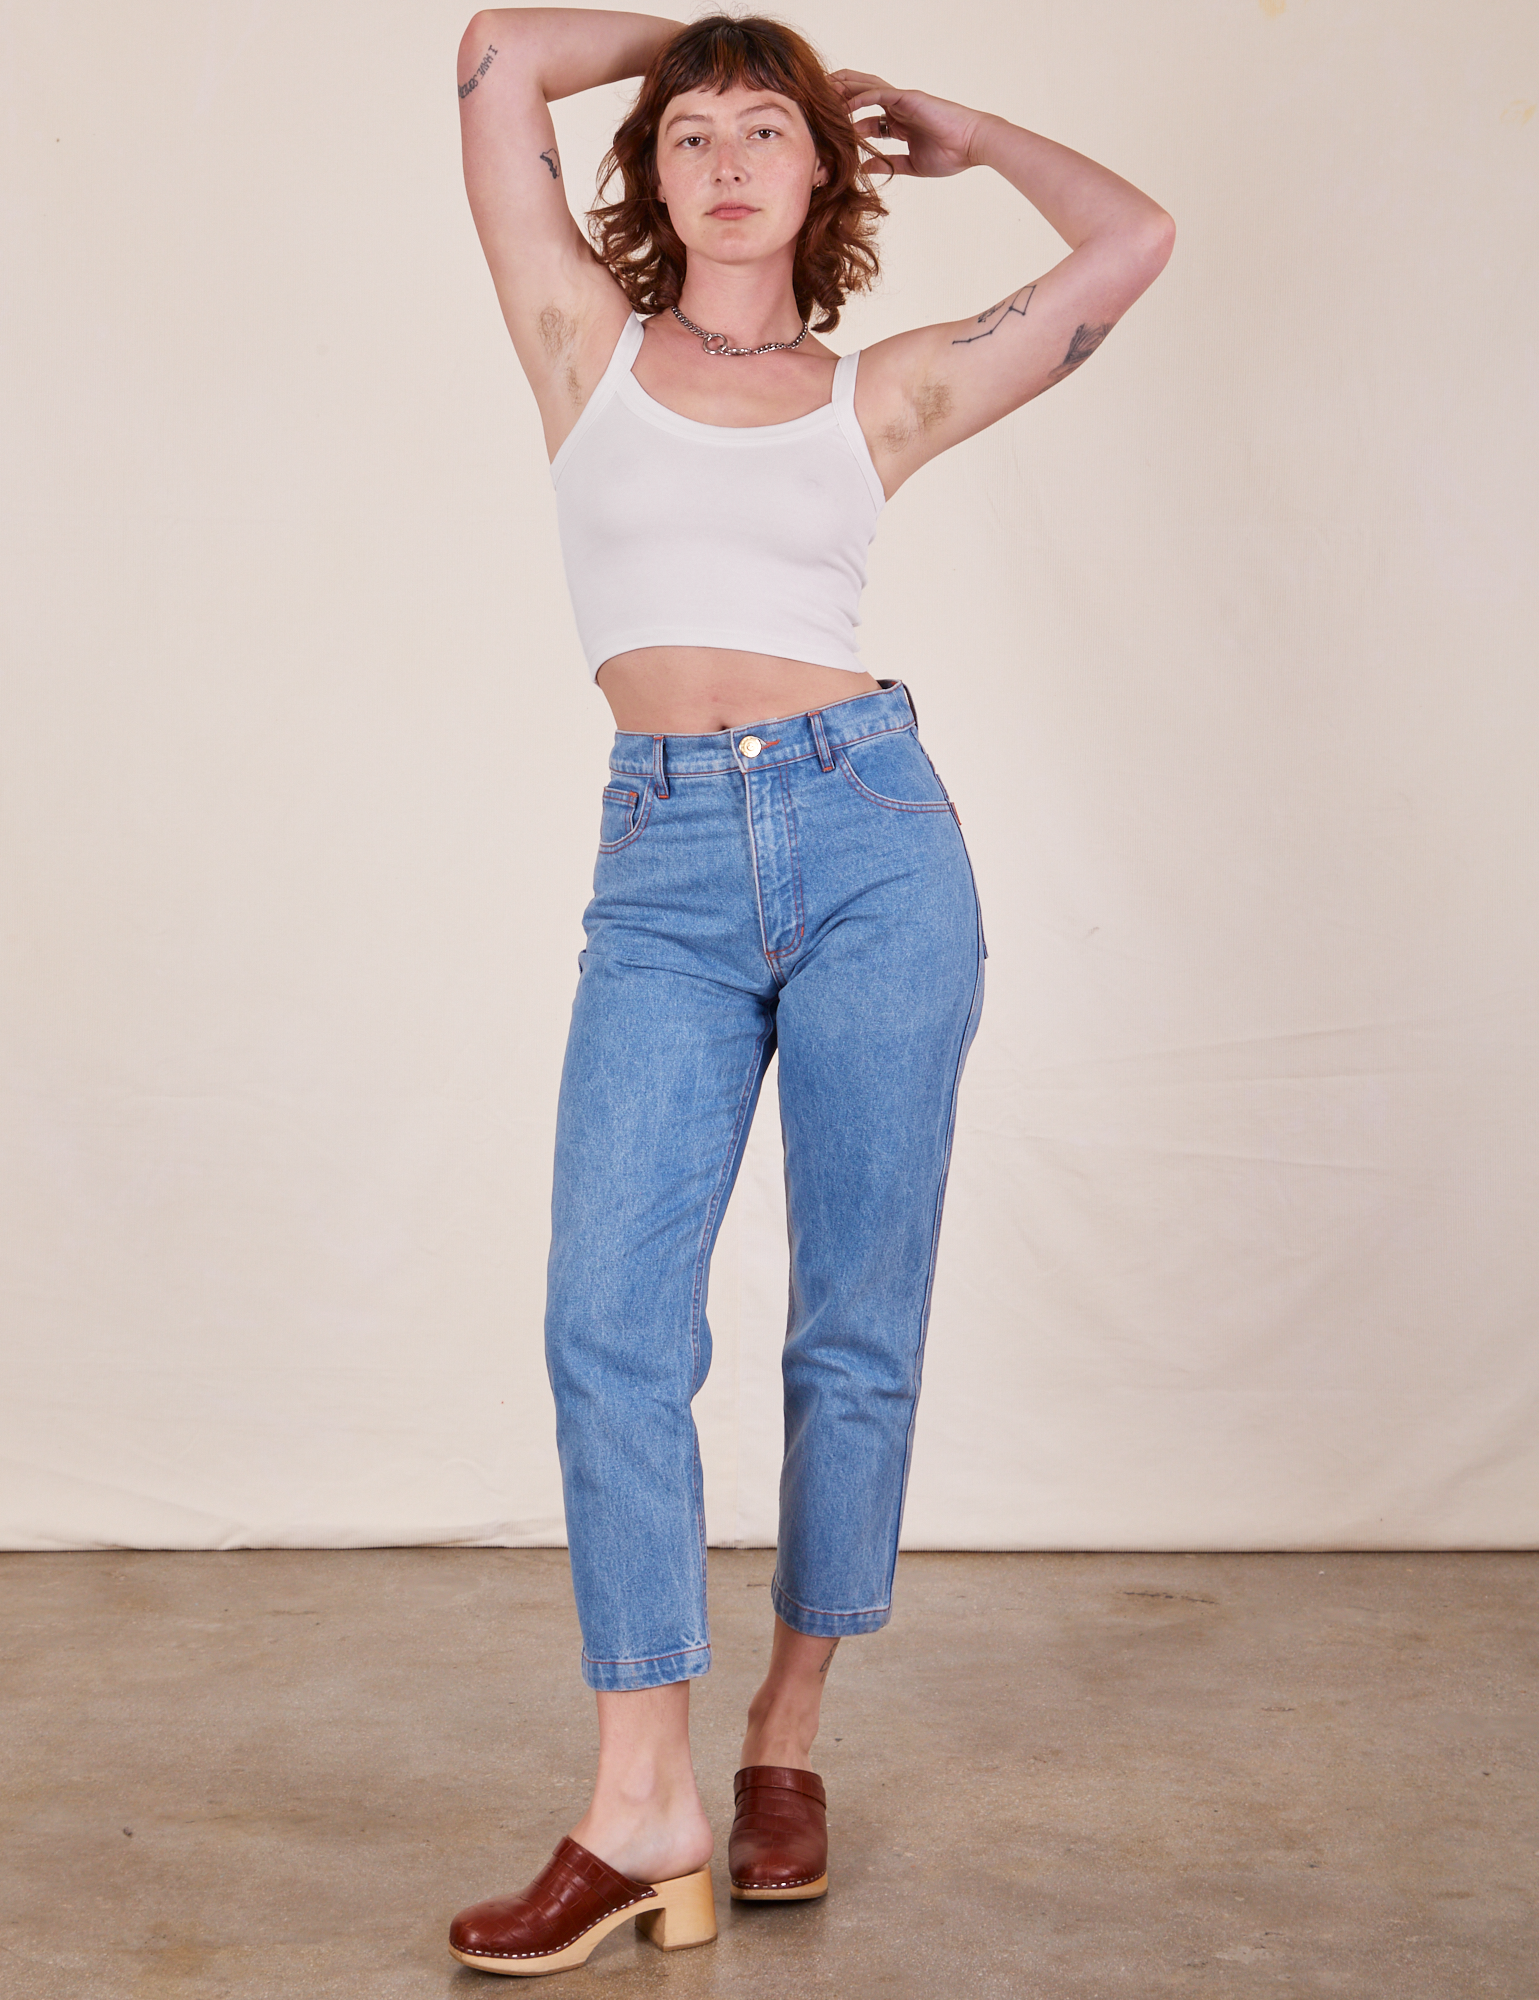 Alex is wearing Cropped Cami in Vintage Tee Off-White and light wash Frontier Jeans